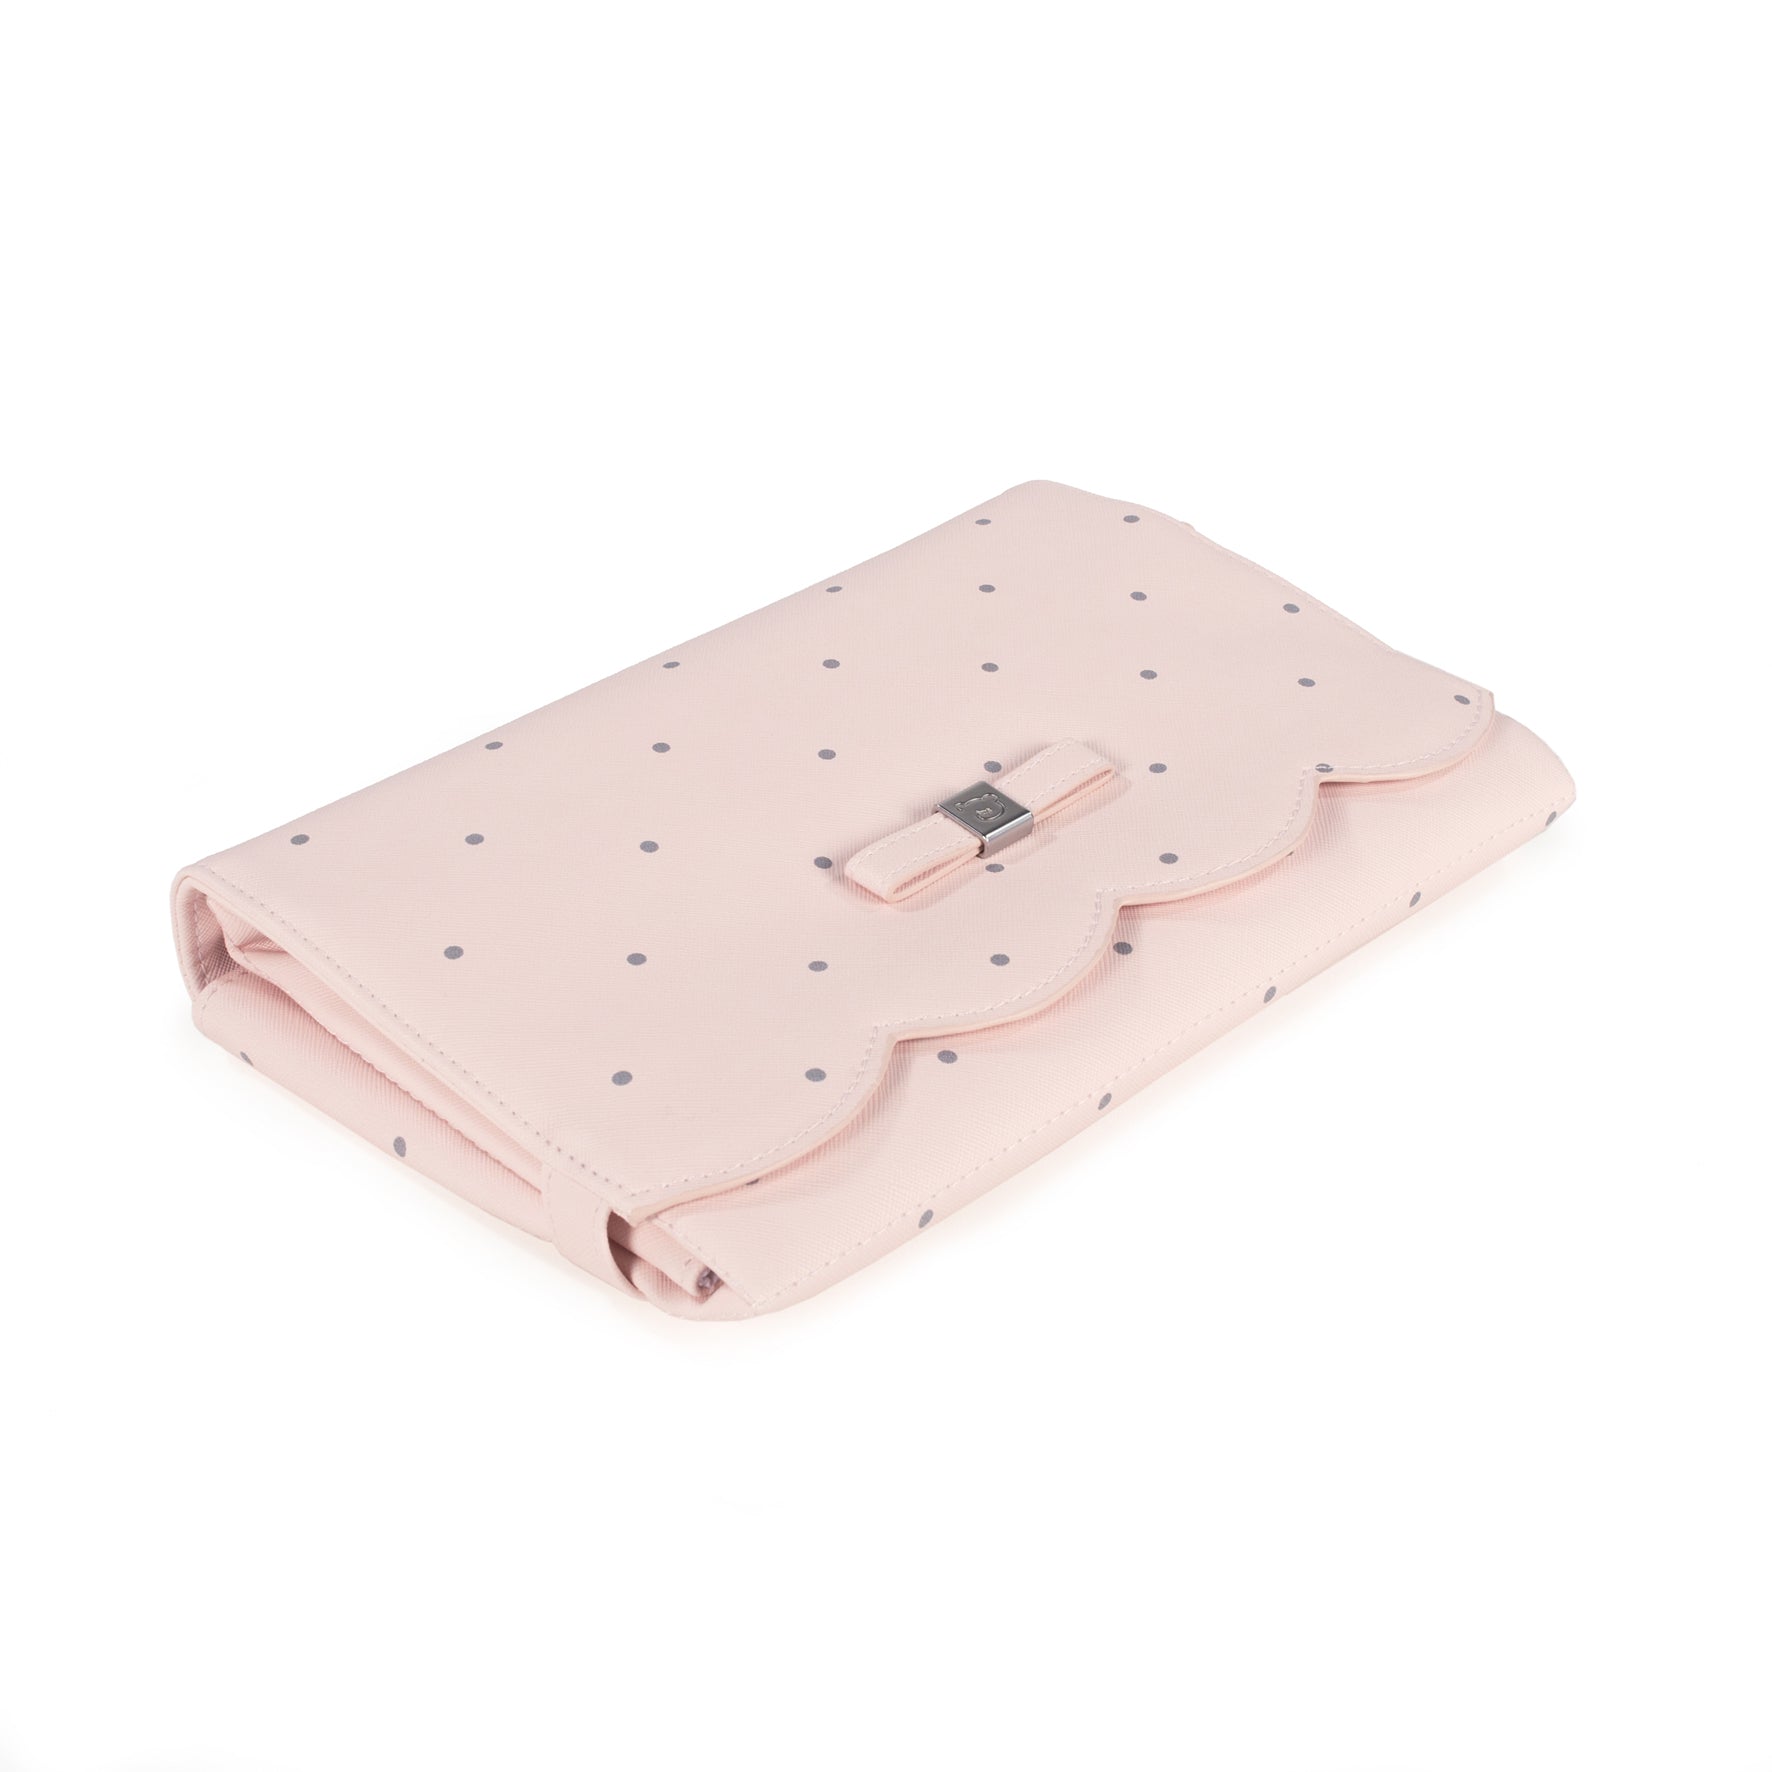 Pasito a Pasito Chelsea Pink Travel Changing Mat